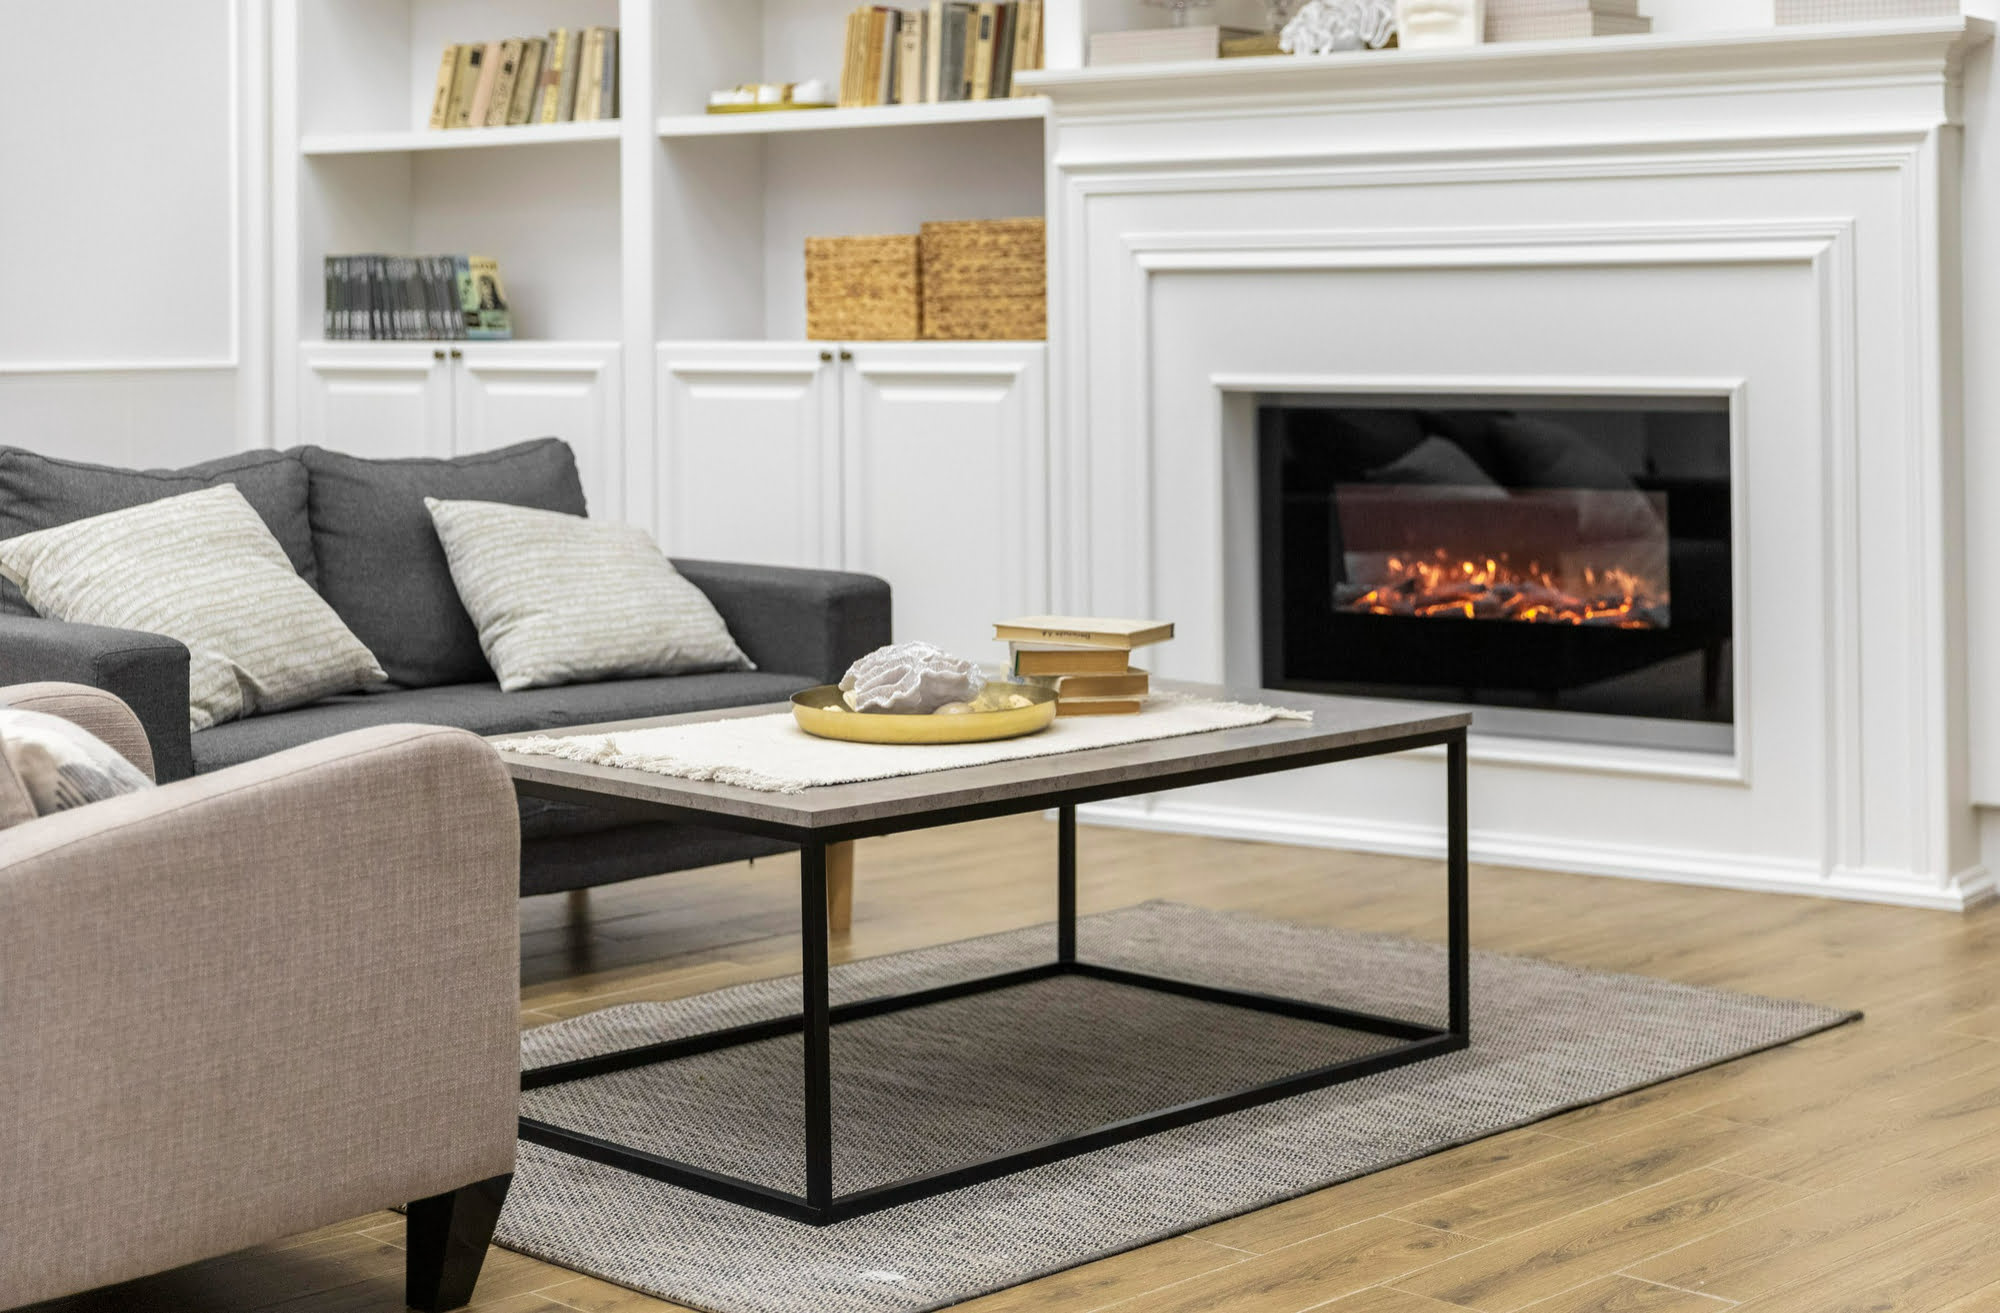 heating-your-home-safely-with-modern-working-fireplace-in-neutral-living-room